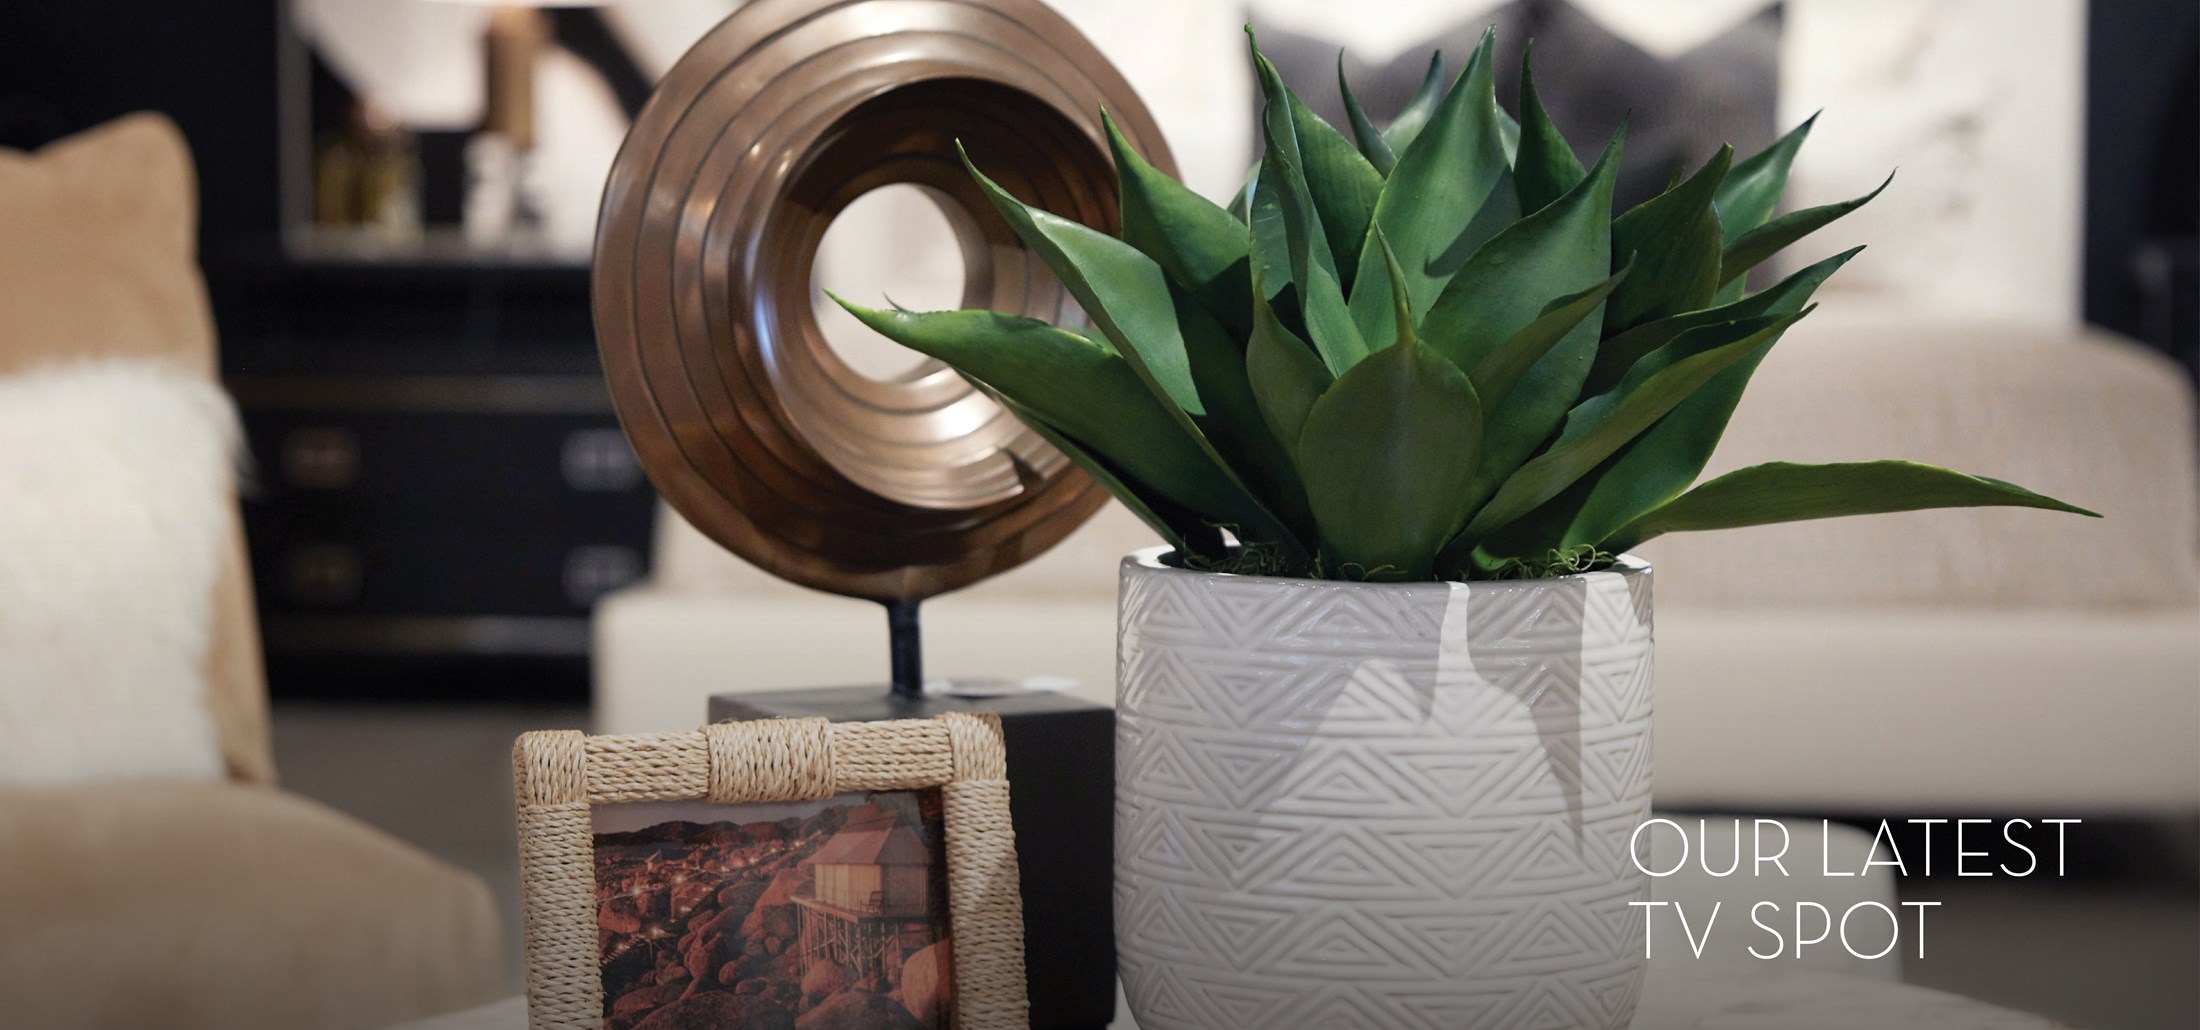 Image of a plant, picture frame and accessory on a cocktail table. Text: Our Latest TV Spot. Links to The Mix TV spot on Youtube.